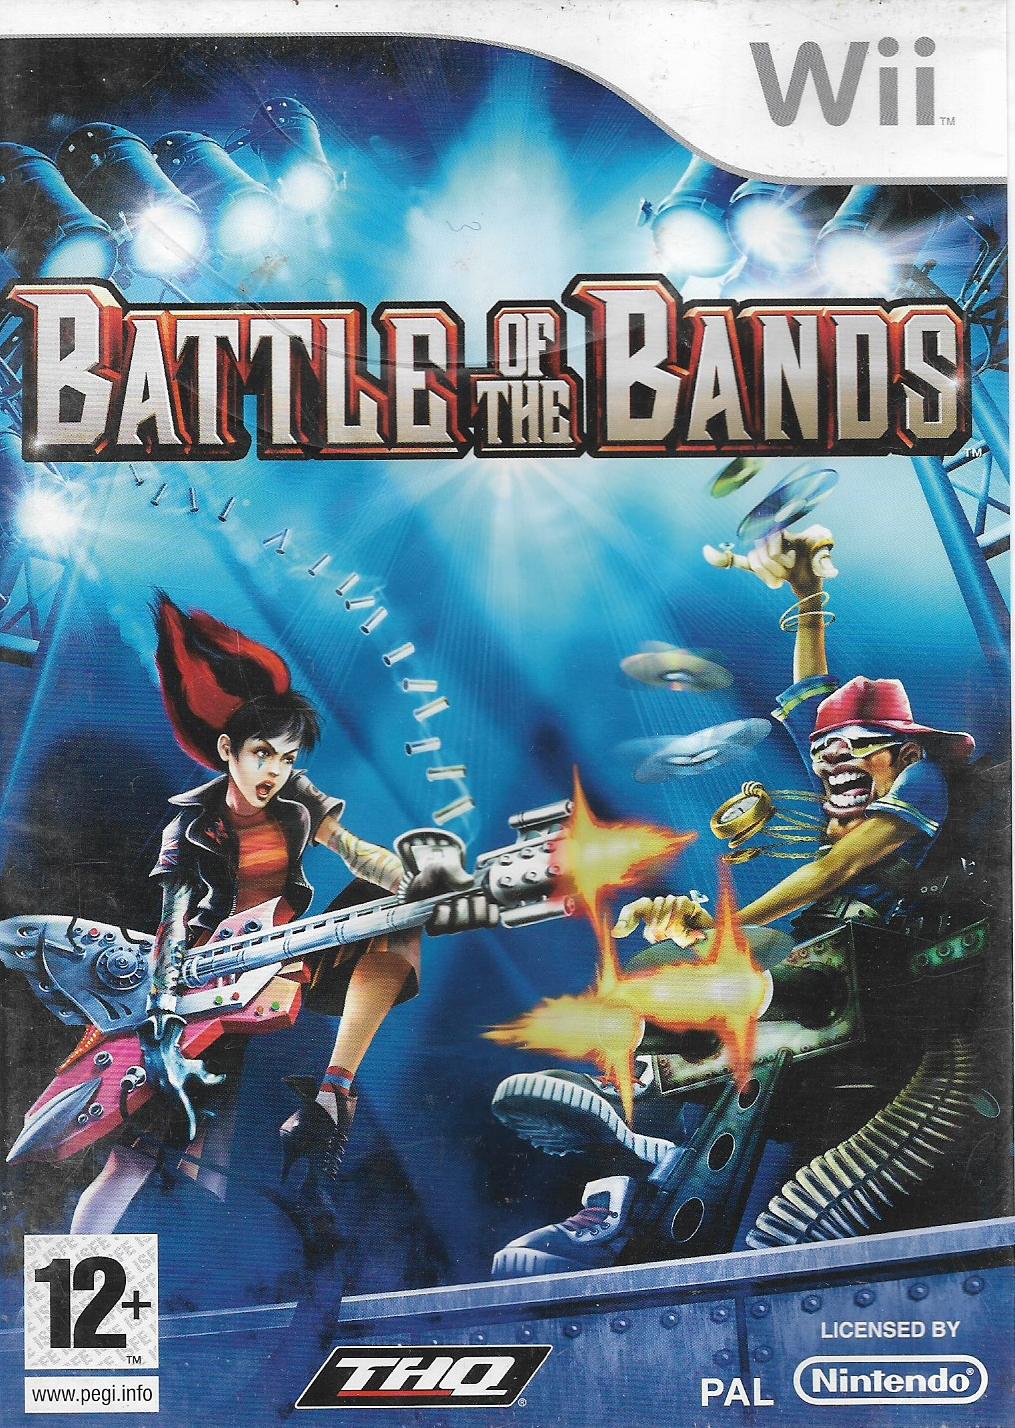 BATTLE OF THE BANDS (WII - BAZAR)